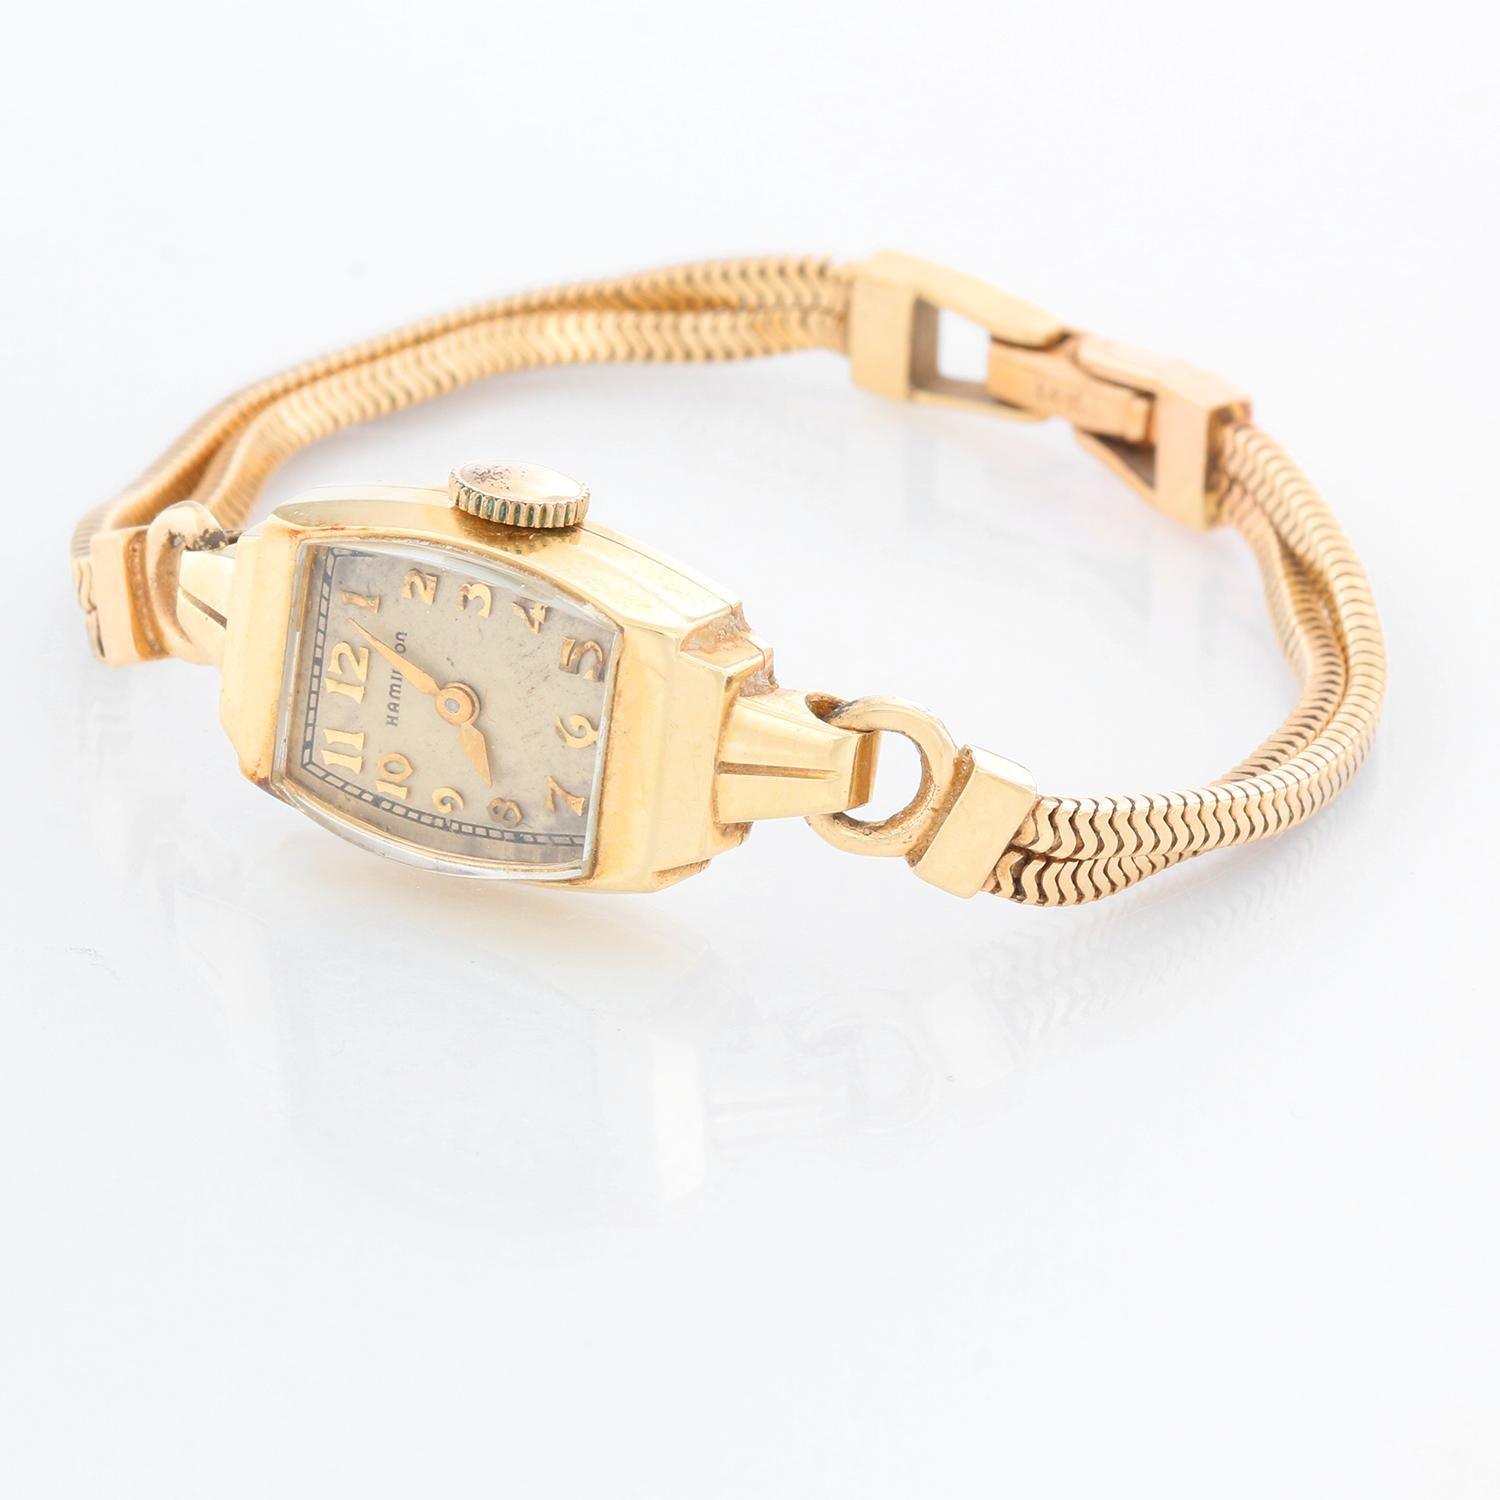 Vintage Ladies Hamilton 14K Yellow Gold  Watch - Manual winding. 14K yellow gold case  (14mm x 29mm). Ivory colored dial with Arabic numerals. 14K yellow gold double rope bracelet. ( will fit a 5 3/4 inch wrist). Pre-owned with custom box.